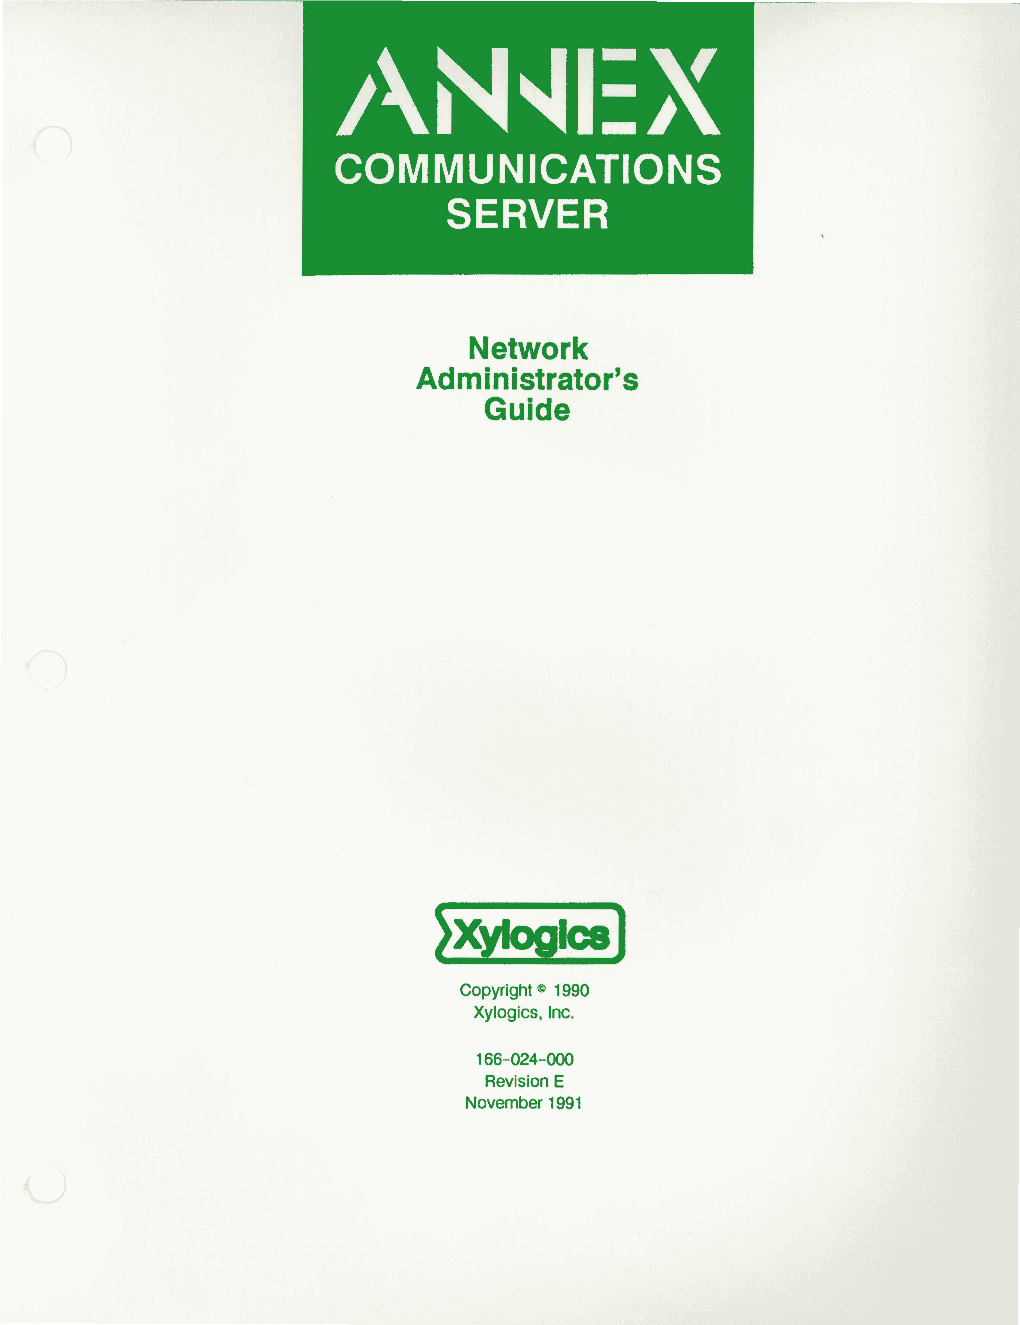 Annex Communications Server Network Administrator's Guide 166